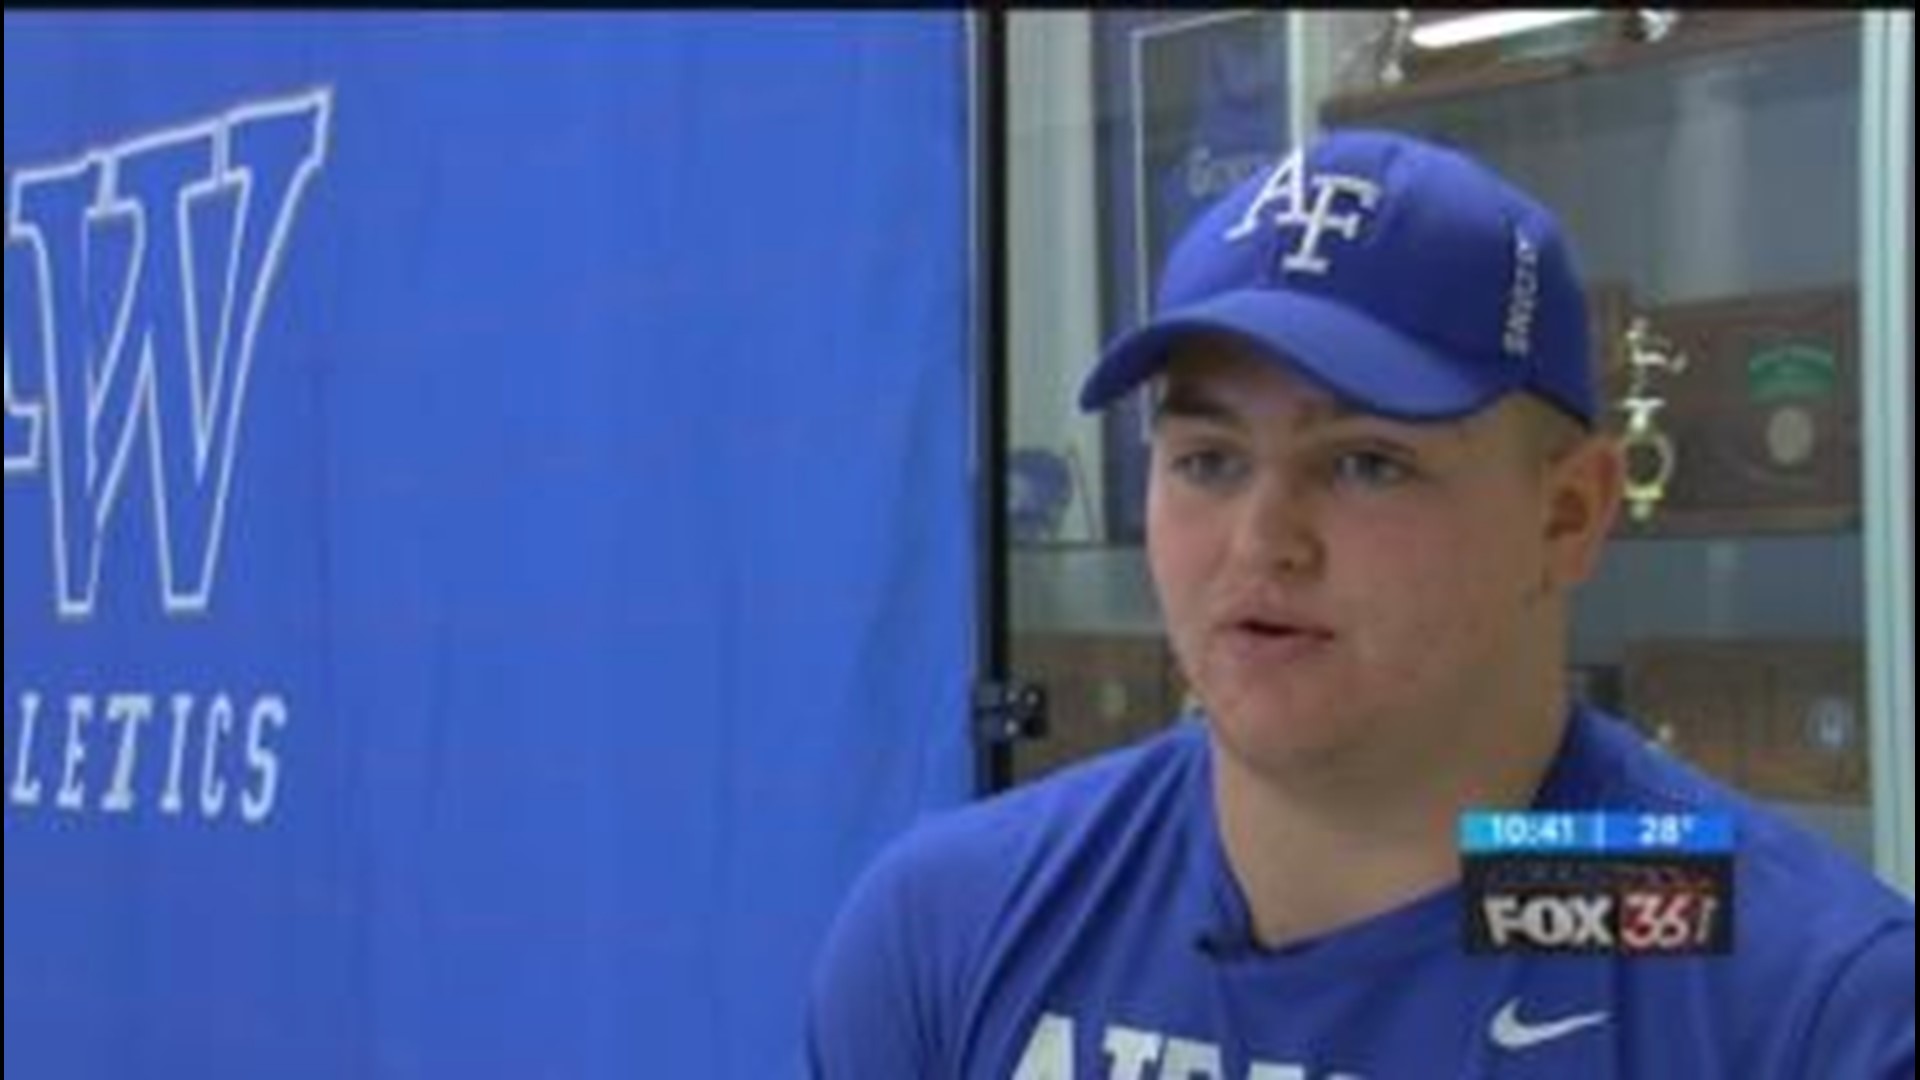 Anthony Wayne senior signs with Air Force Academy